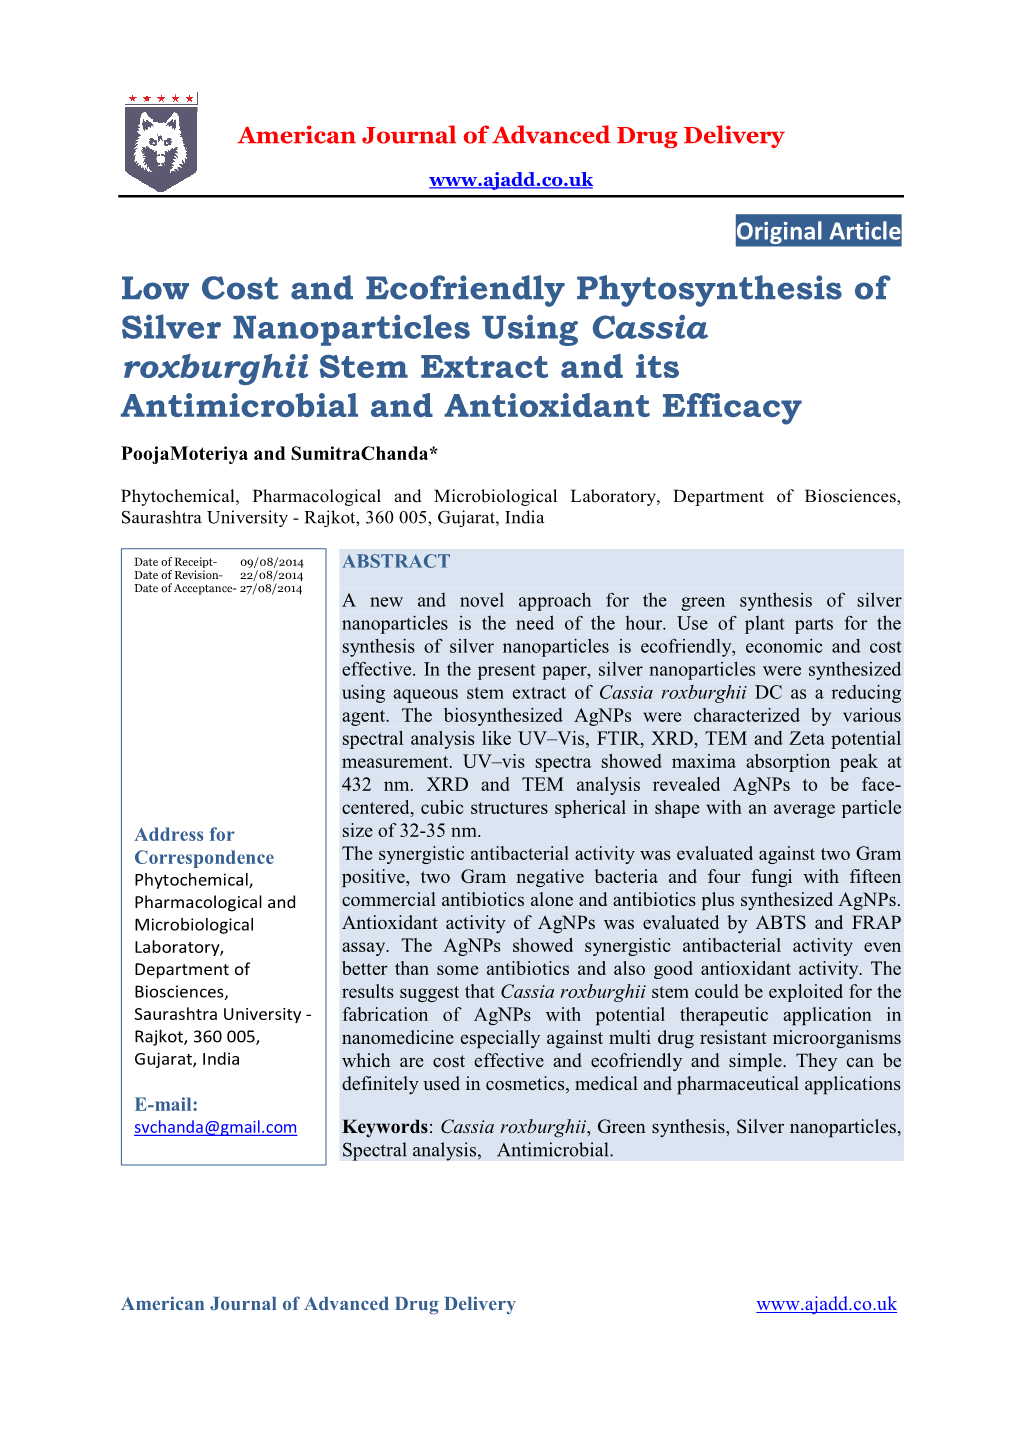 Low Cost and Ecofriendly Phytosynthesis of Silver